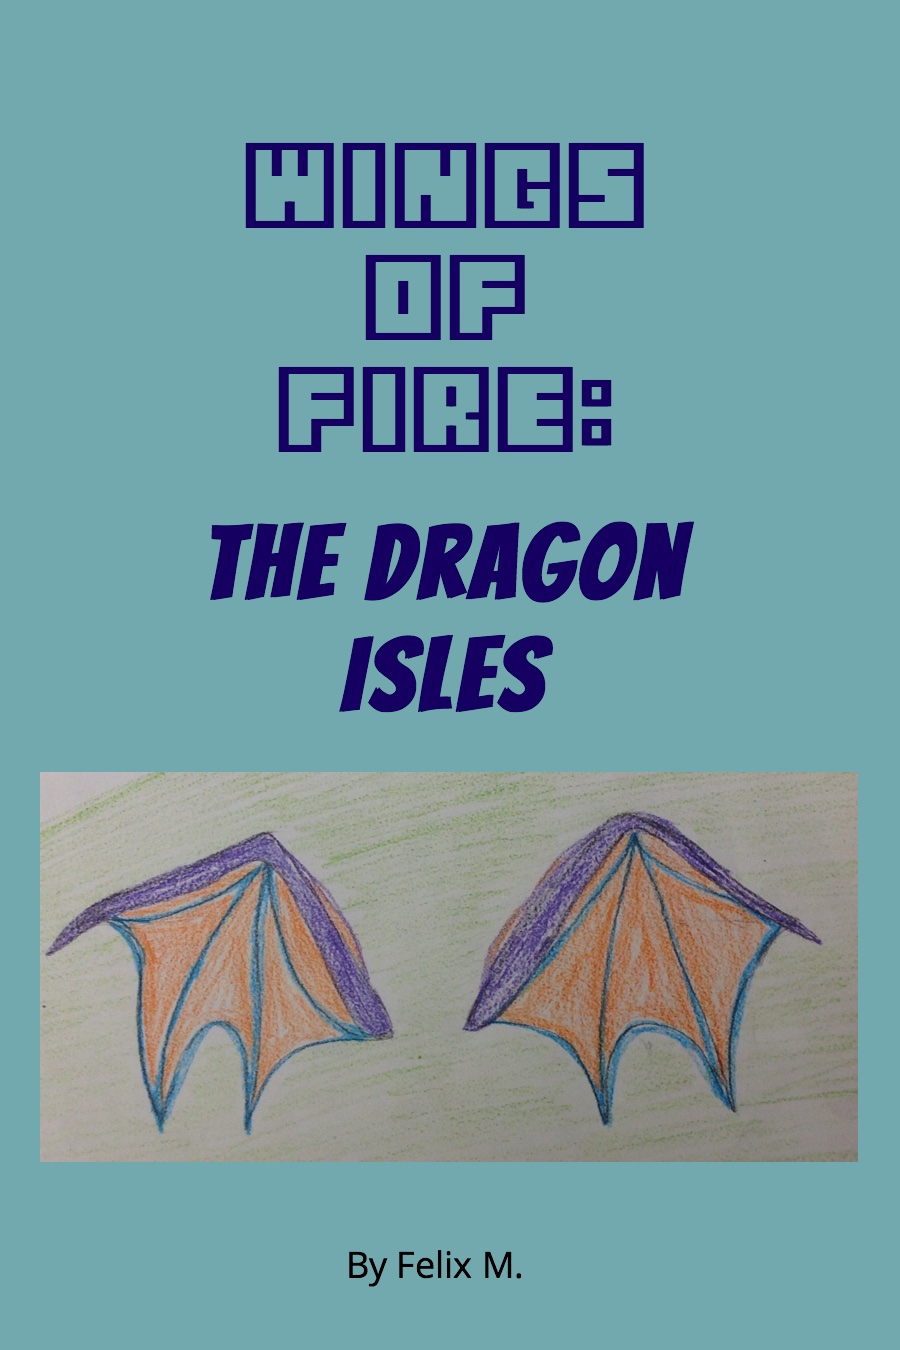 Wings Of Fire Book 16 The Dragon Isles by Felix M